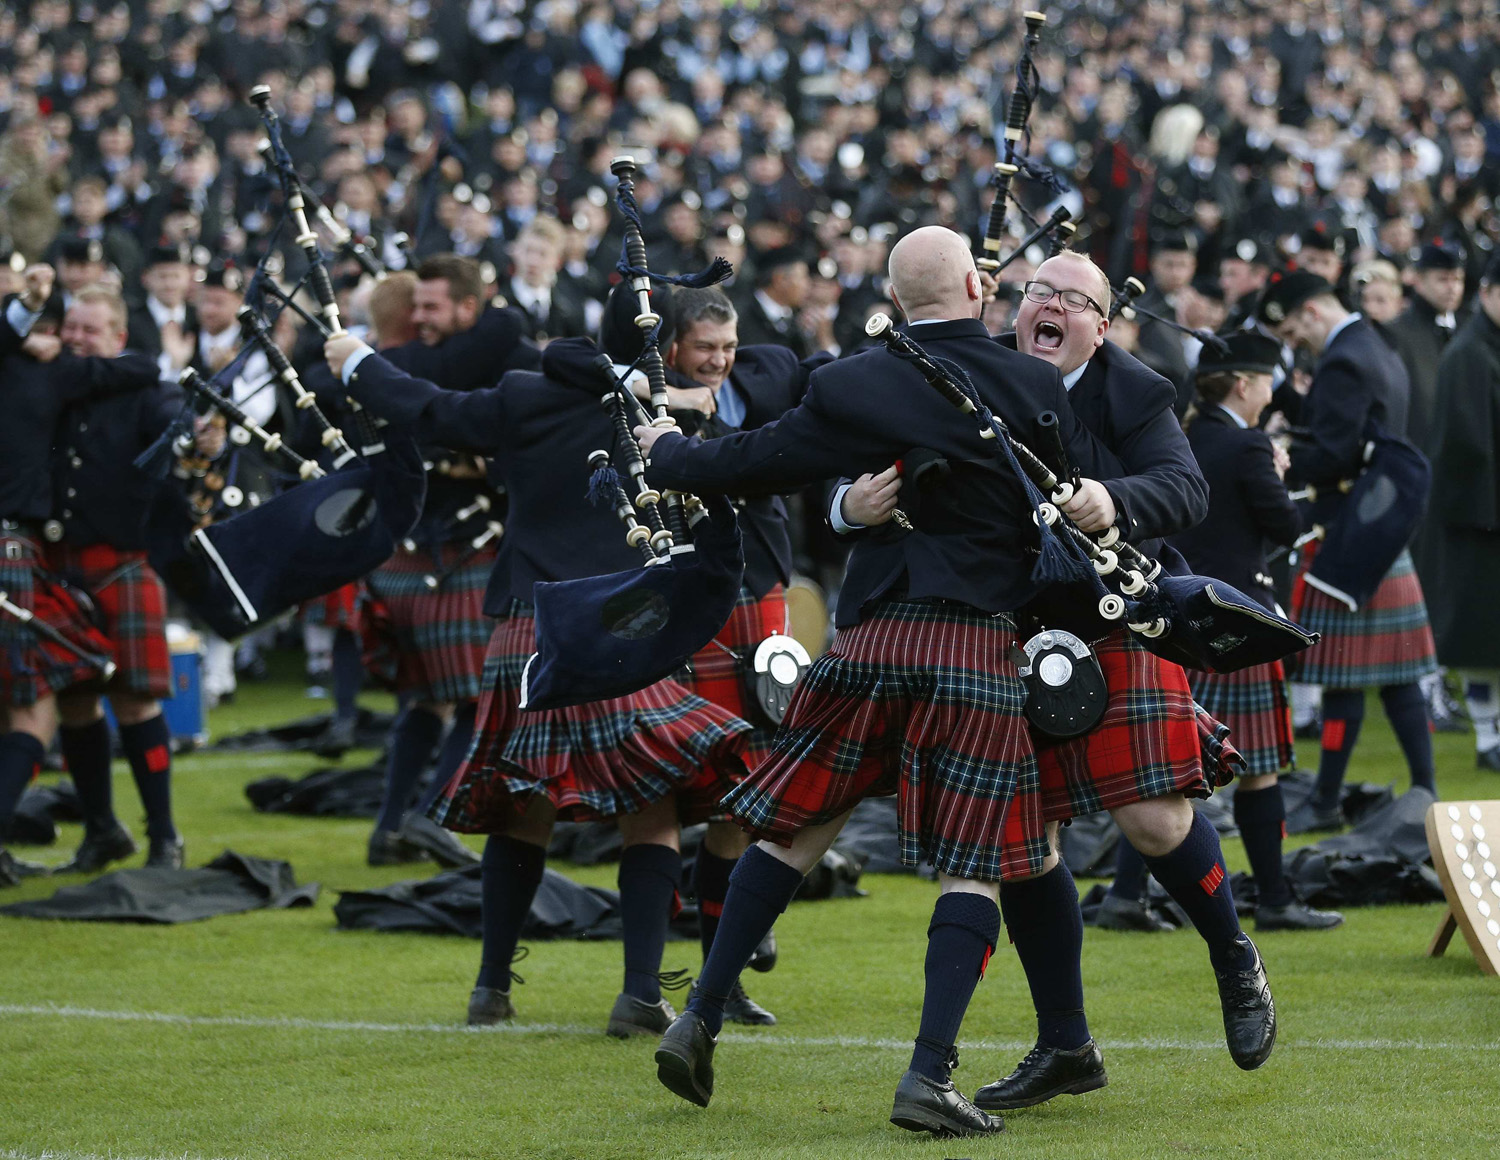 Members of the Field Marshall Montgomery Pipe Band react to winning the annual World Pipe Band Championships at Glasgow Green, Scotland on Aug. 16, 2014.